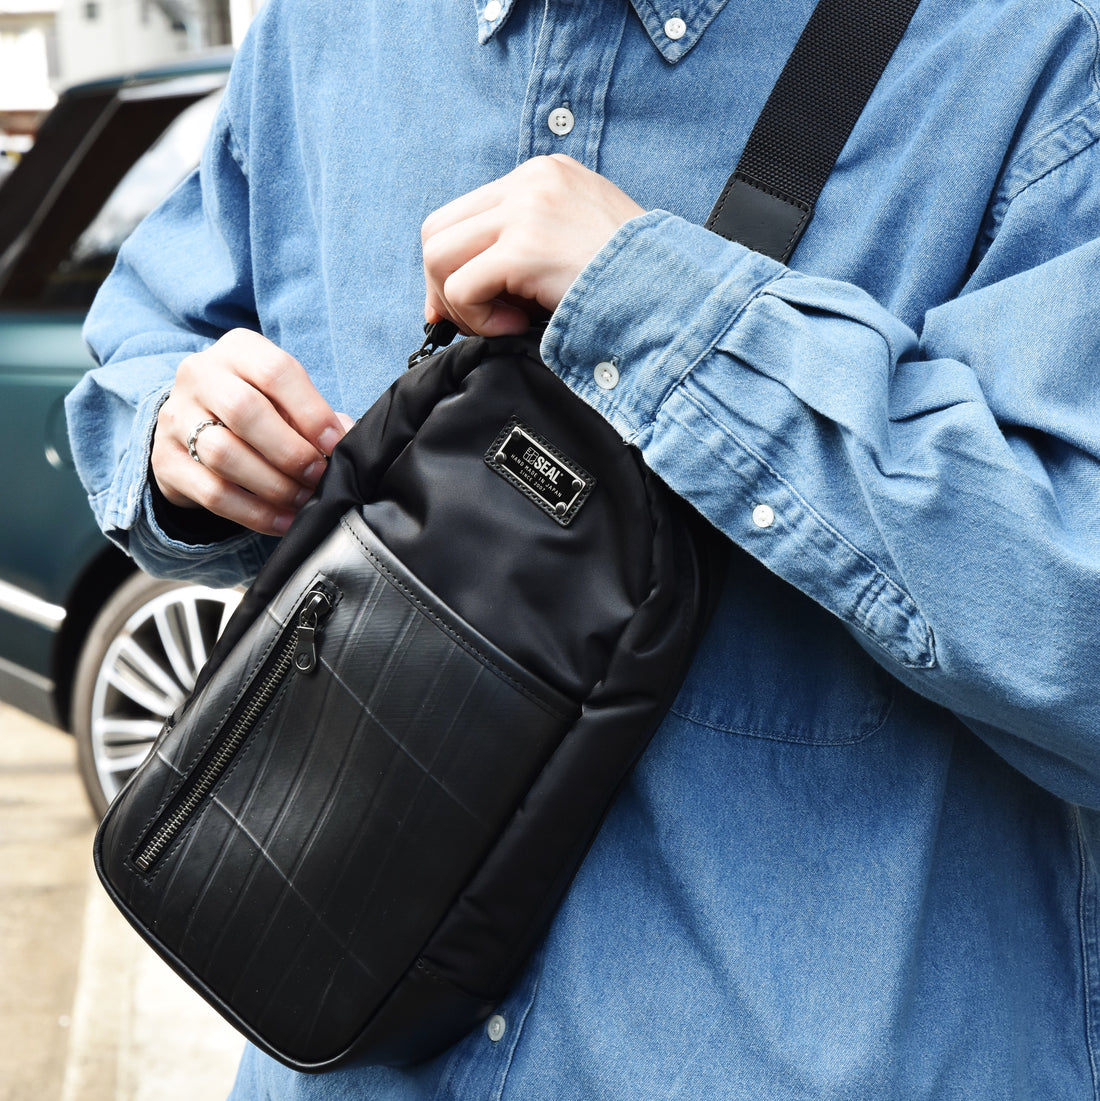 New Sling bag made from tire tubes and recycled nylon[Sling bag MA-1 MODEL］